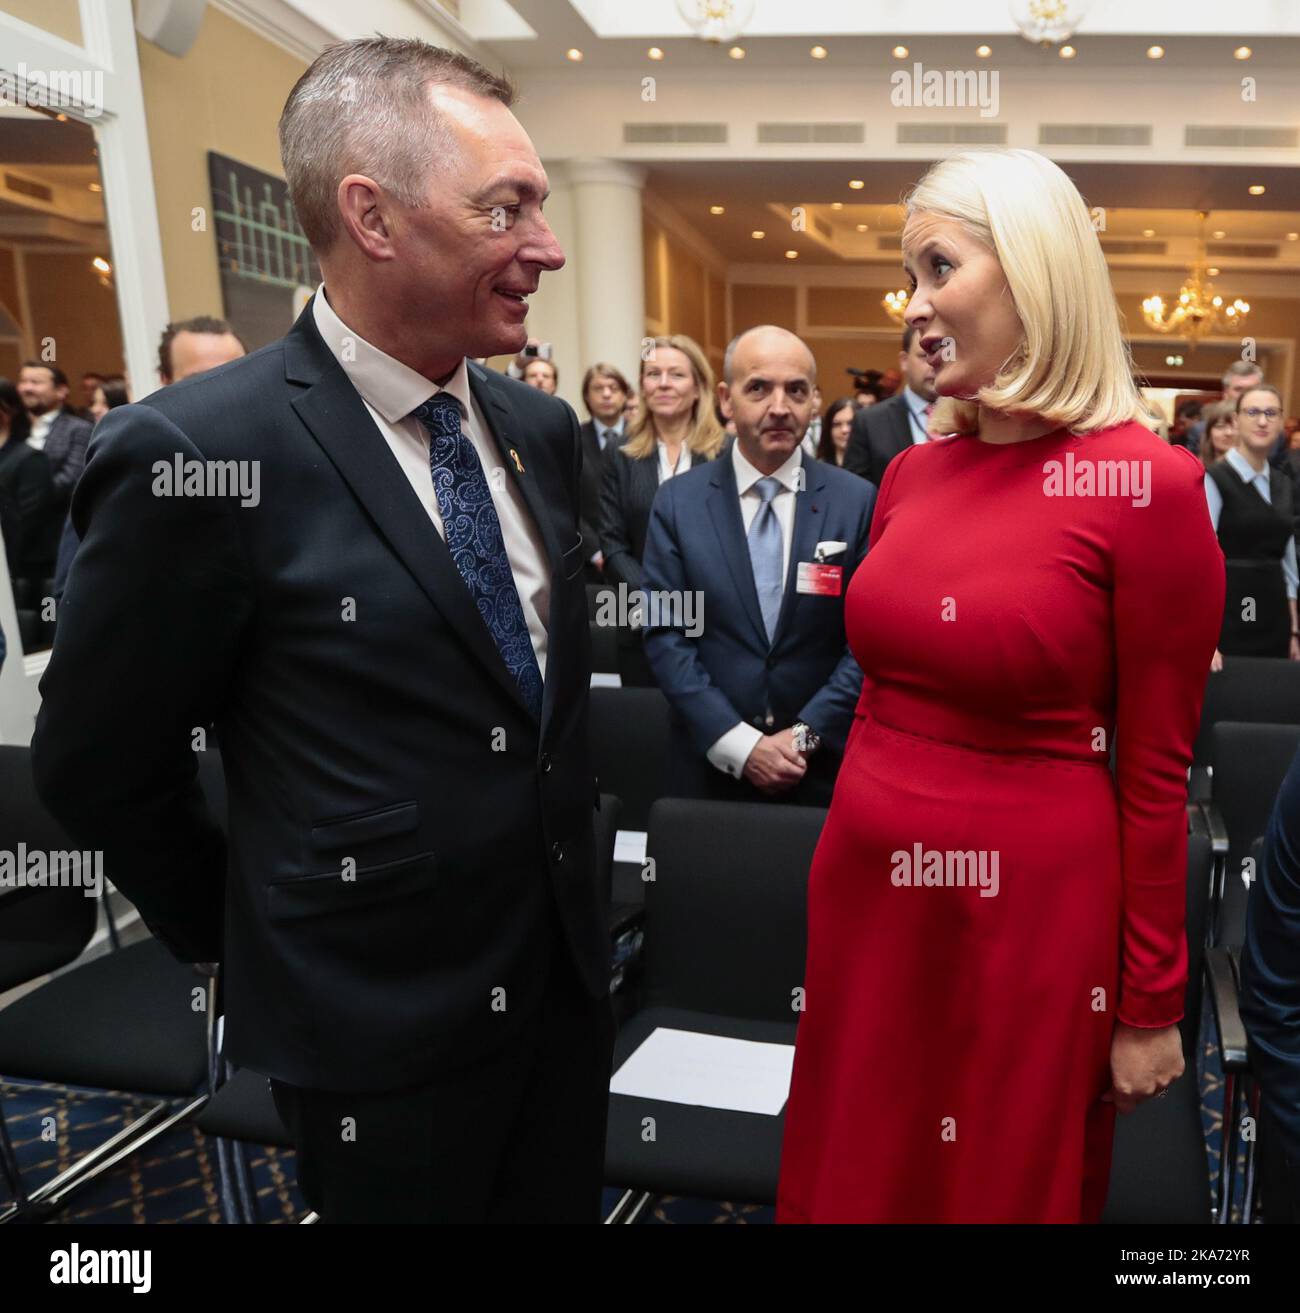 Vilnius, Lithuania 20180425. Crown Princess Mette-Marit and Defense Minister Frank Bakke-Jensen in a conversation during the seminar ' Norwegian Technology Inspiring Growth ' in Vilnius, Lithuania. The Crown Prince Couple on official visits to the three Baltic countries, Latvia, Lithuania and Estonia. Photo: Lise Aaserud / NTB scanpi Stock Photo